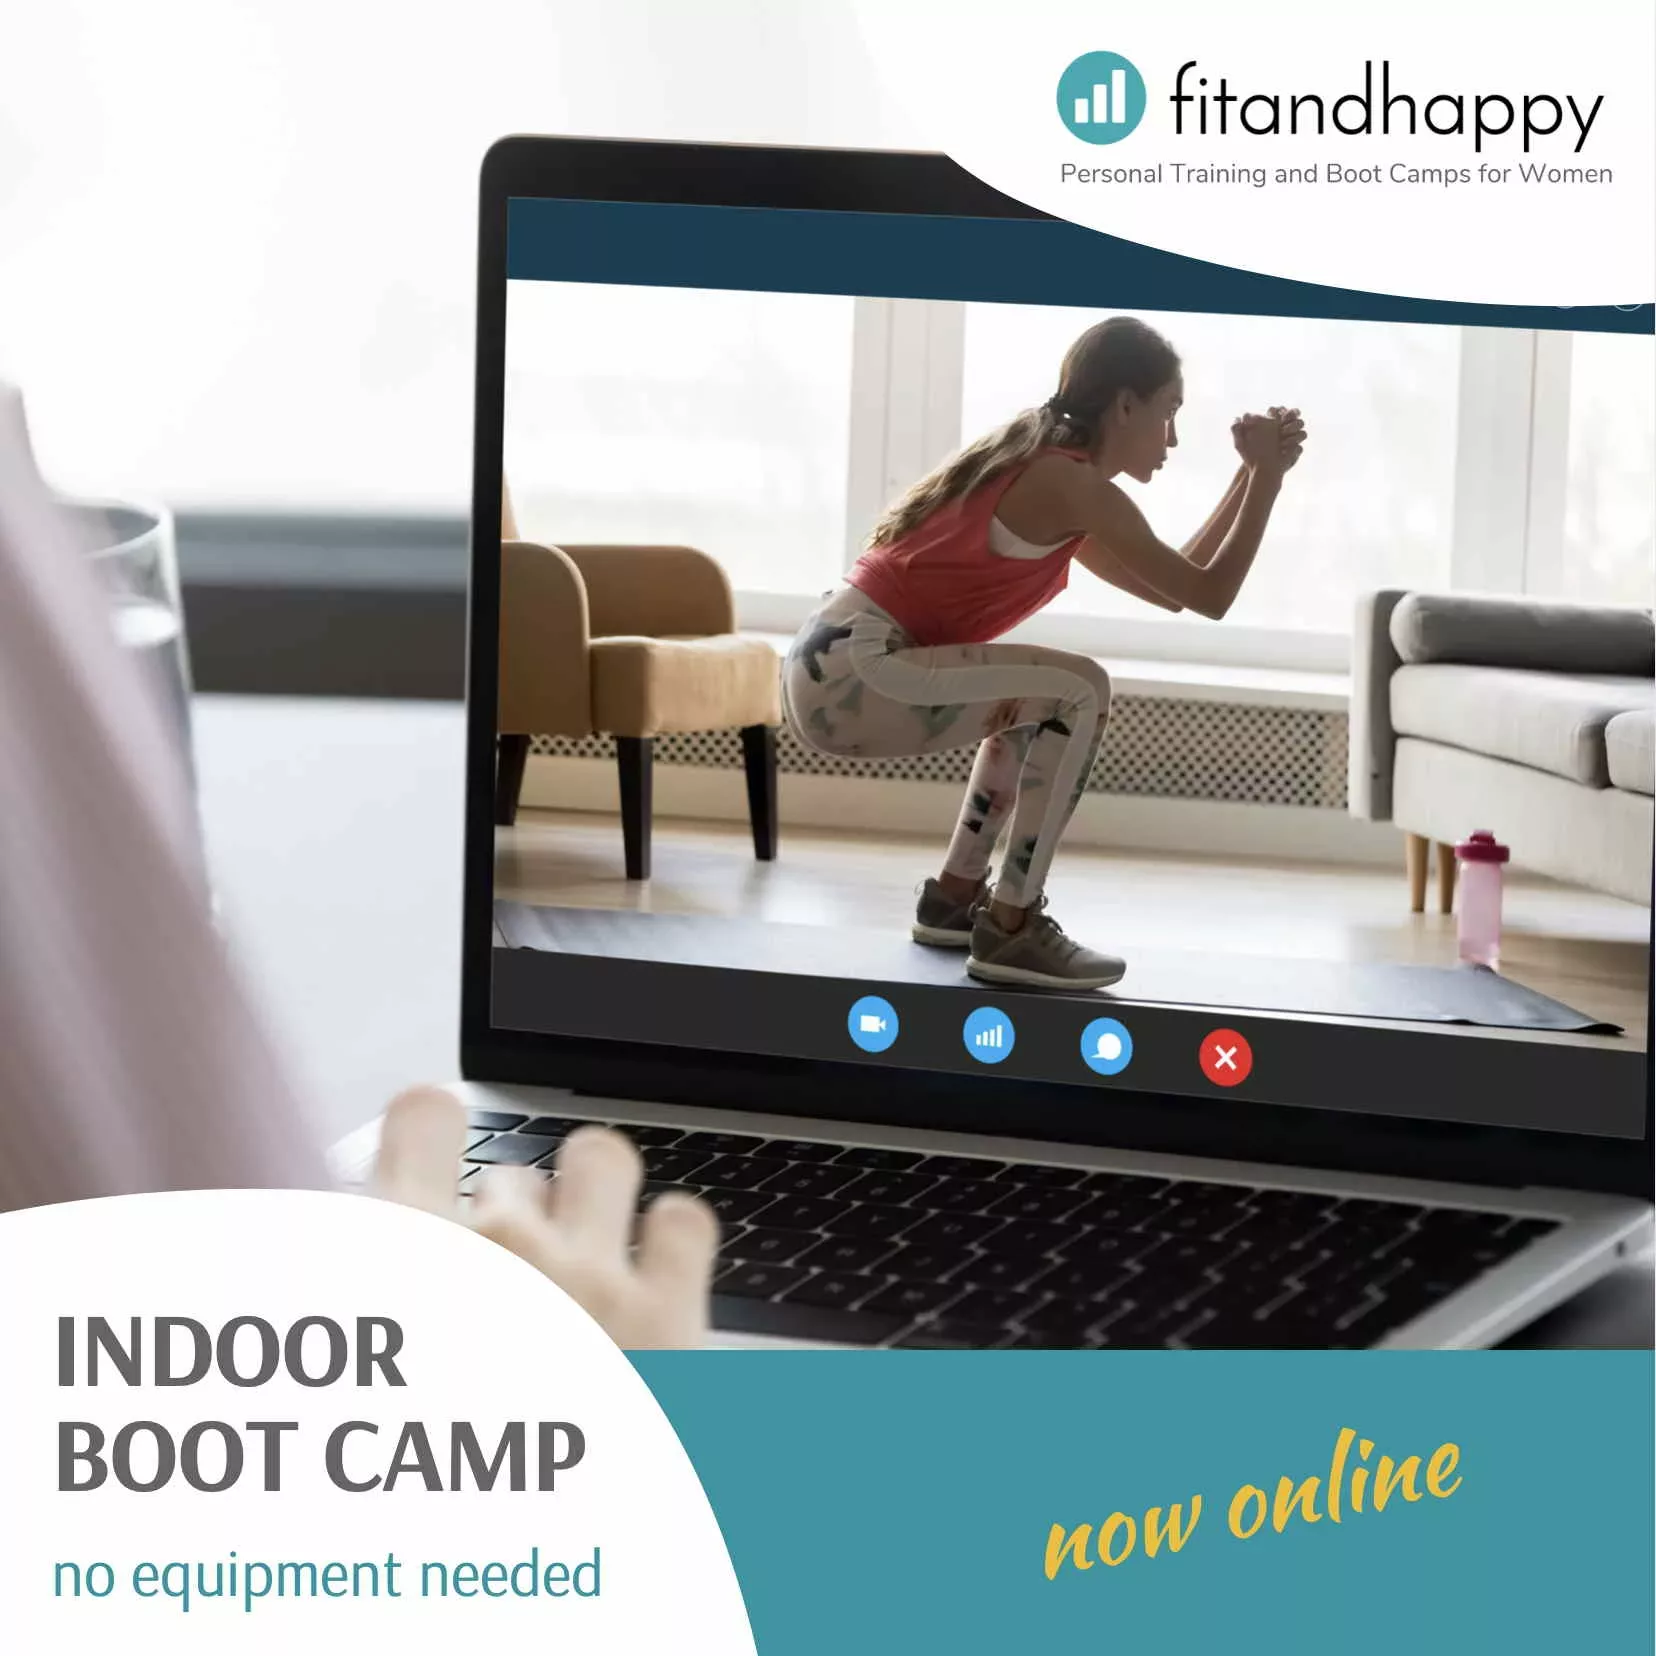 online boot camp